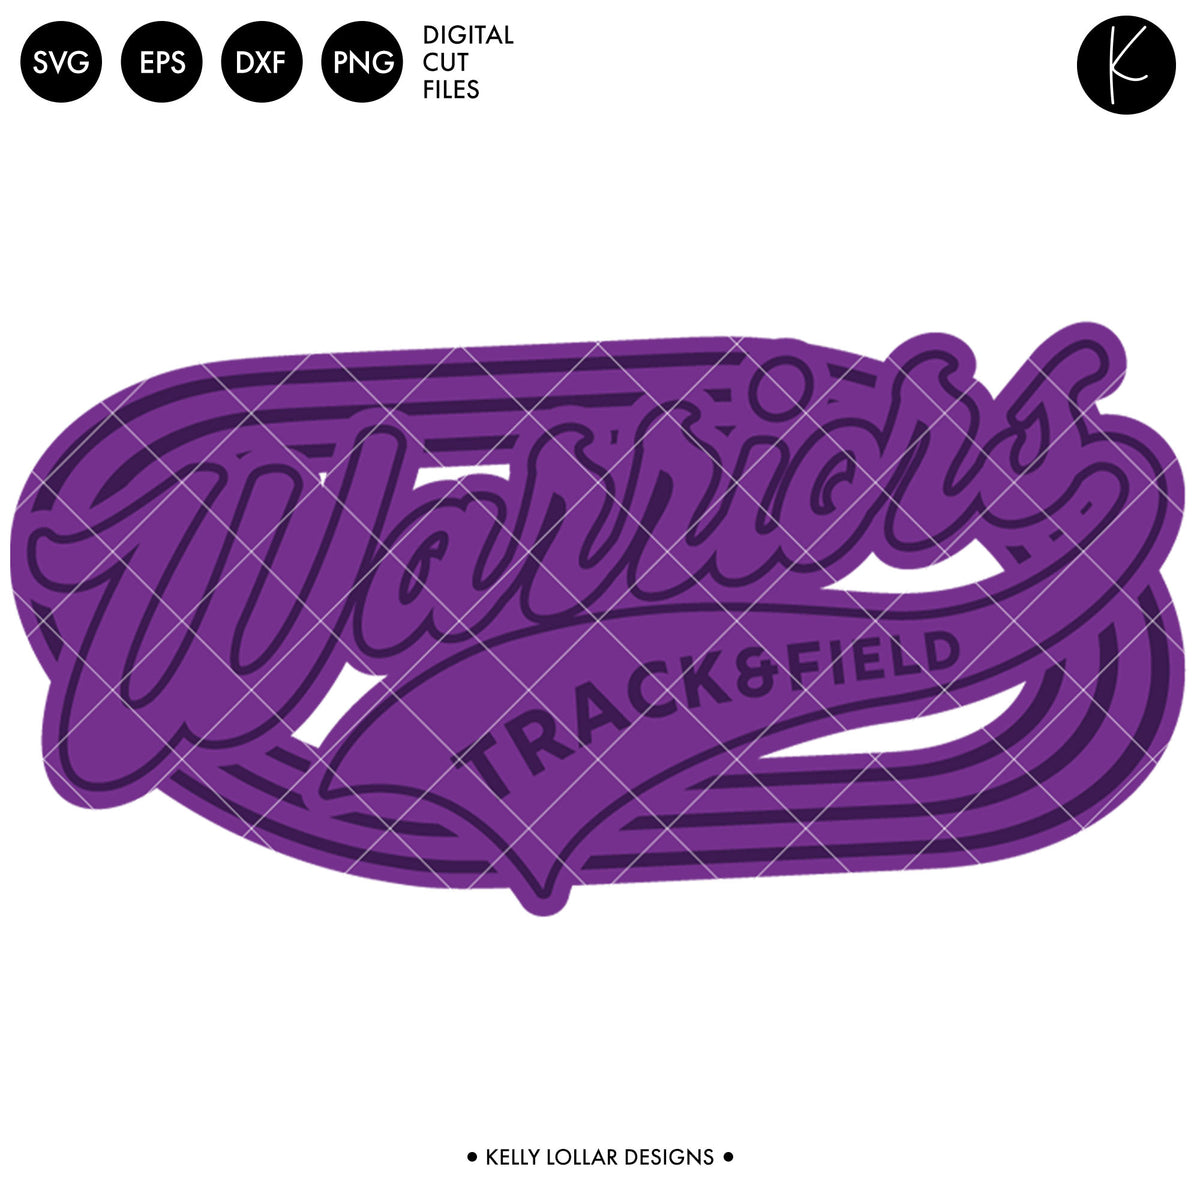 Warriors Track &amp; Field Bundle | SVG DXF EPS PNG Cut Files